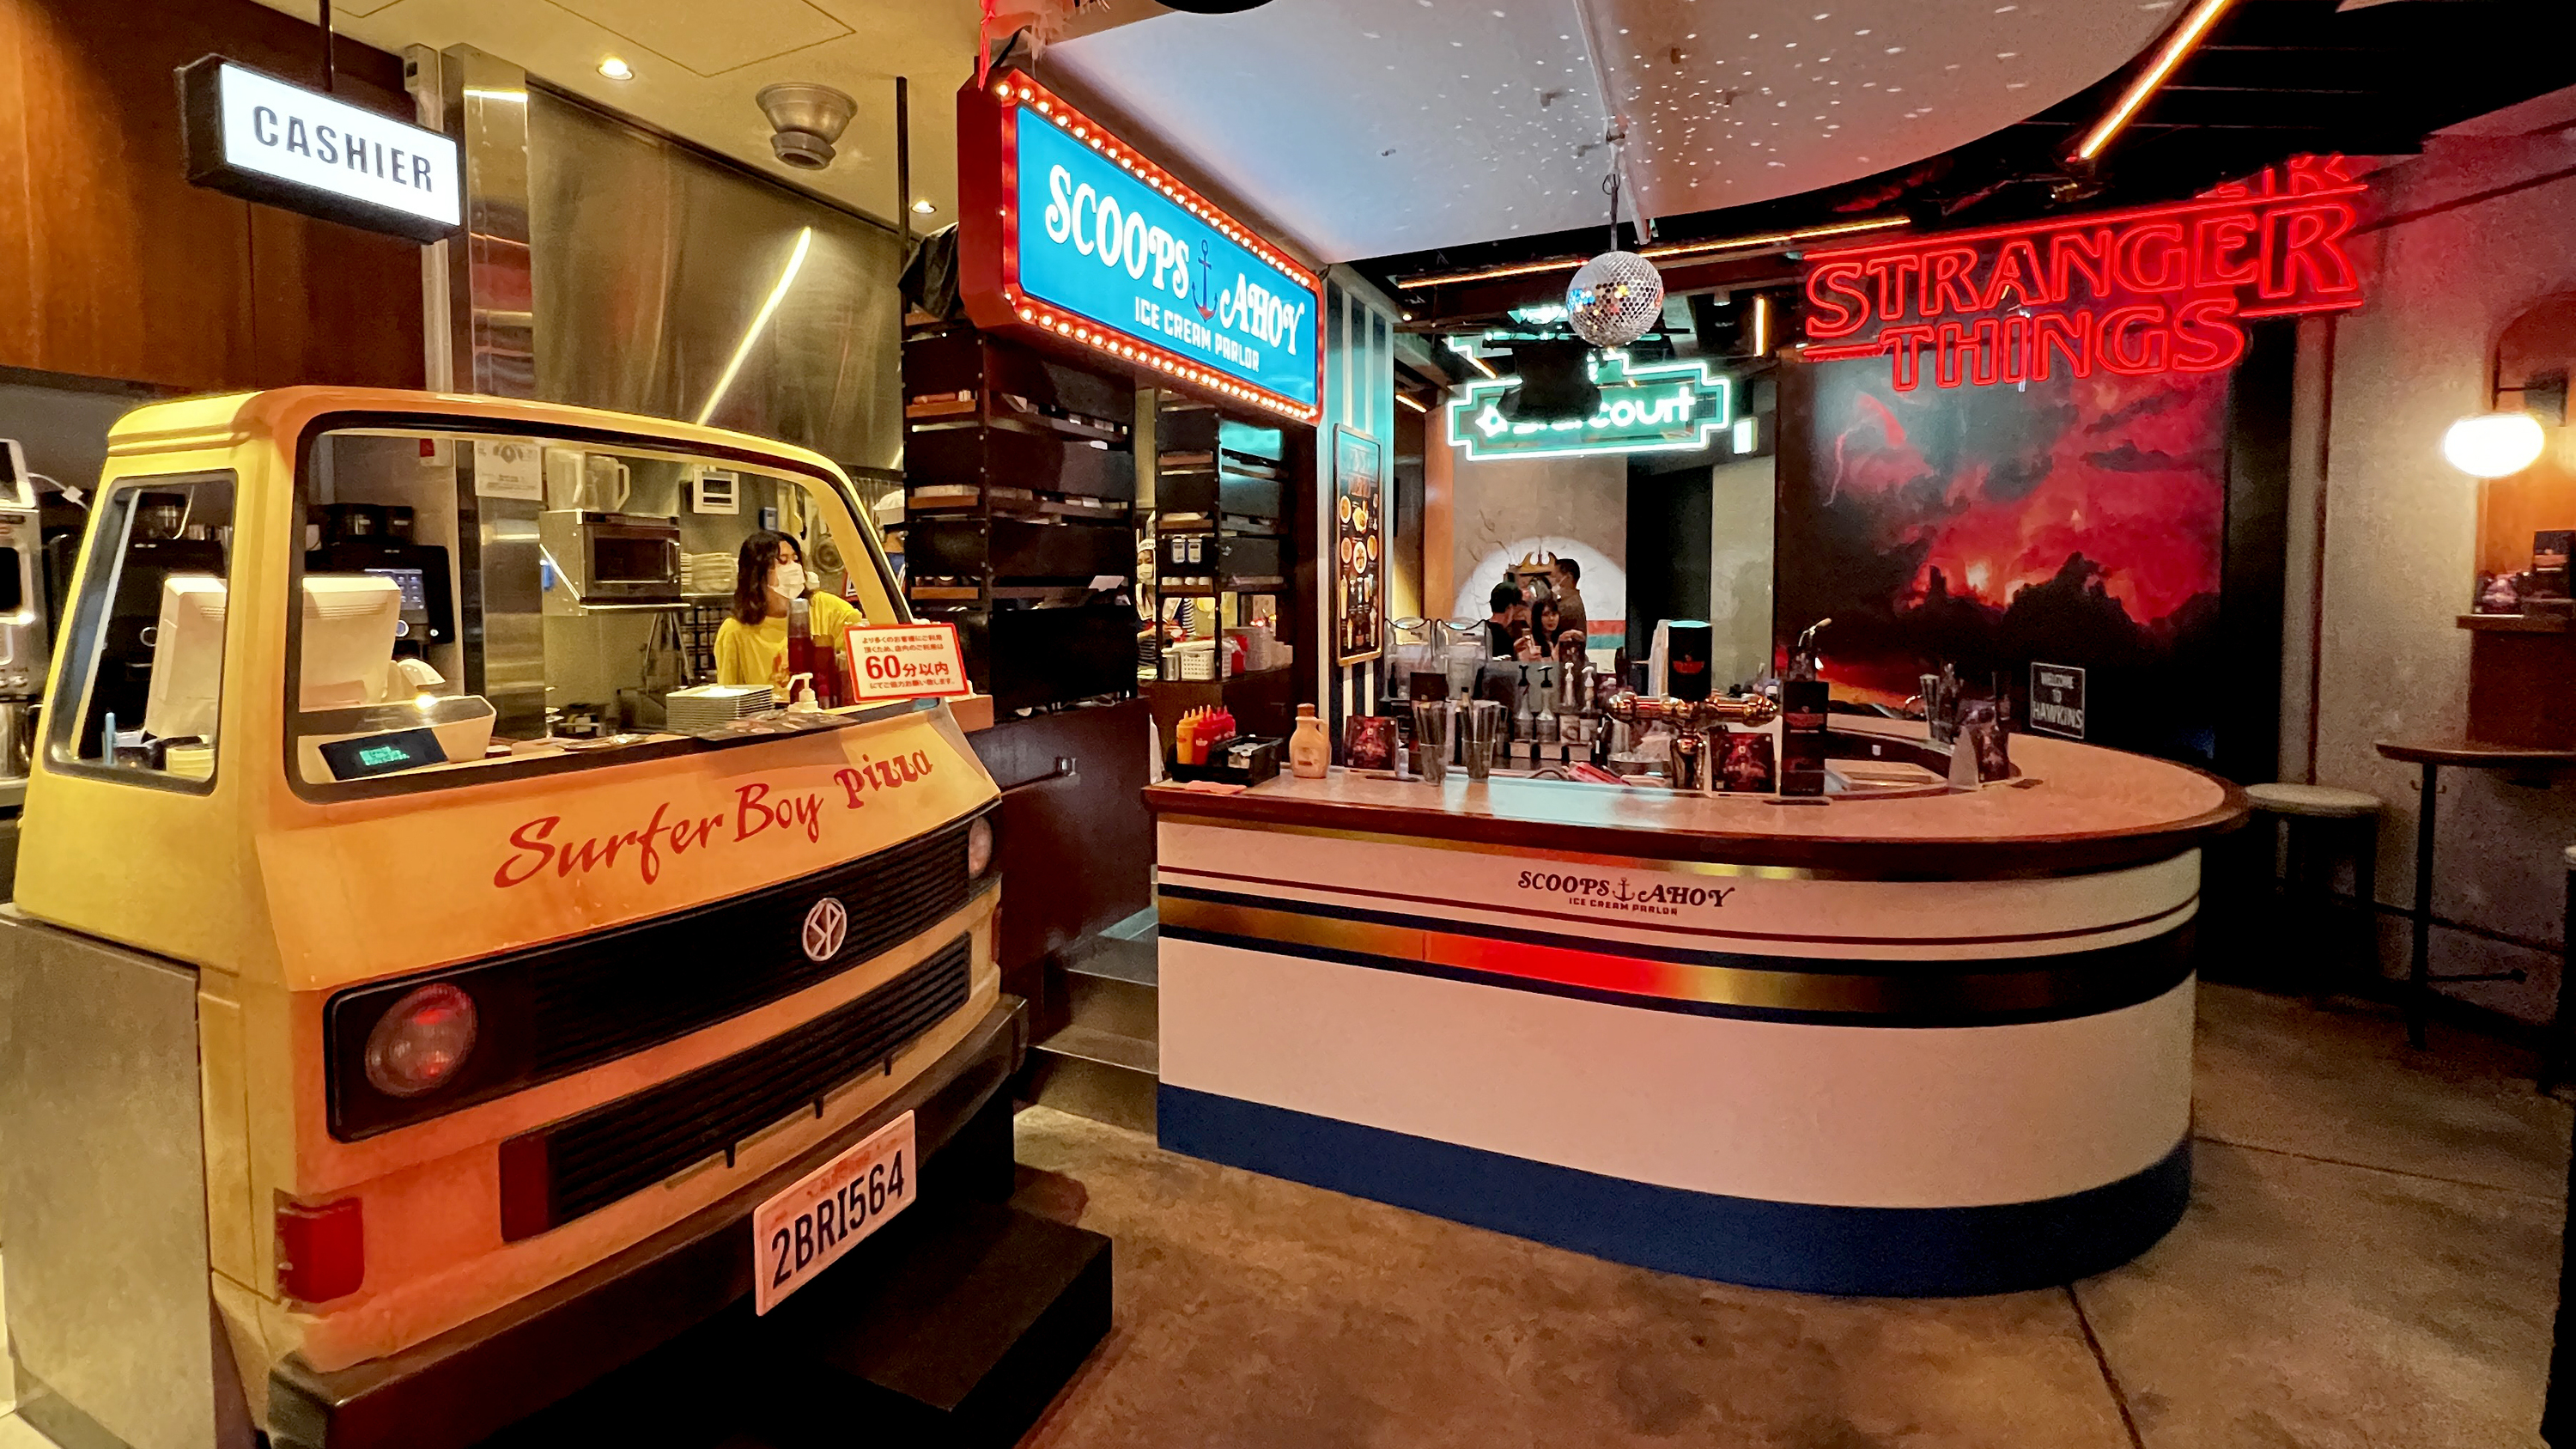 There's now a 'Stranger Things' pop-up café in Shibuya